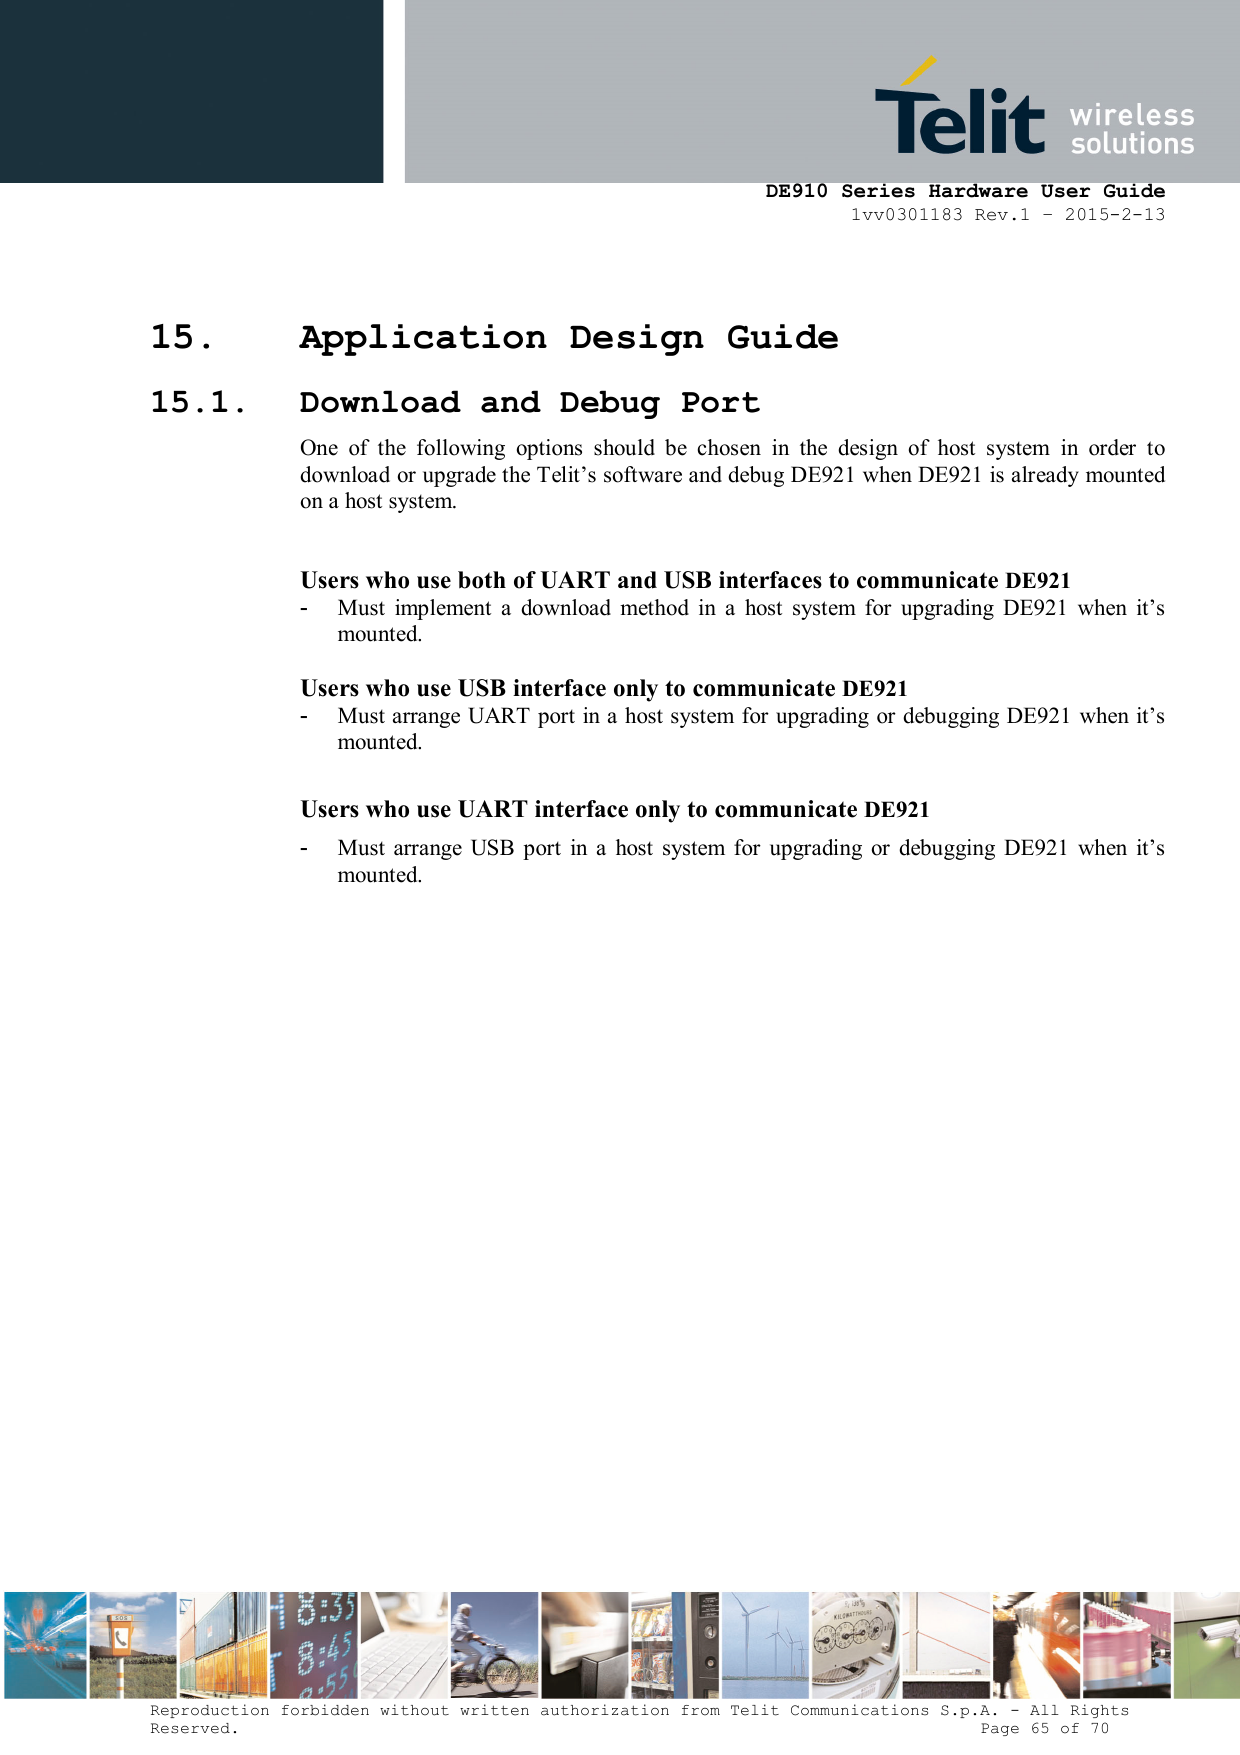      DE910 Series Hardware User Guide 1vv0301183 Rev.1 – 2015-2-13 Reproduction forbidden without written authorization from Telit Communications S.p.A. - All Rights Reserved.                                                                          Page 65 of 70 15. Application Design Guide 15.1. Download and Debug Port One  of  the  following  options  should  be  chosen  in  the  design  of  host  system  in  order  to download or upgrade the Telit’s software and debug DE921 when DE921 is already mounted on a host system.  Users who use both of UART and USB interfaces to communicate DE921 -  Must  implement  a  download  method  in  a  host  system  for  upgrading  DE921  when  it’s mounted.  Users who use USB interface only to communicate DE921 -  Must arrange UART port in a host system for upgrading or debugging DE921 when it’s mounted.  Users who use UART interface only to communicate DE921 -  Must  arrange  USB  port  in  a  host  system  for  upgrading  or  debugging  DE921  when  it’s mounted.  